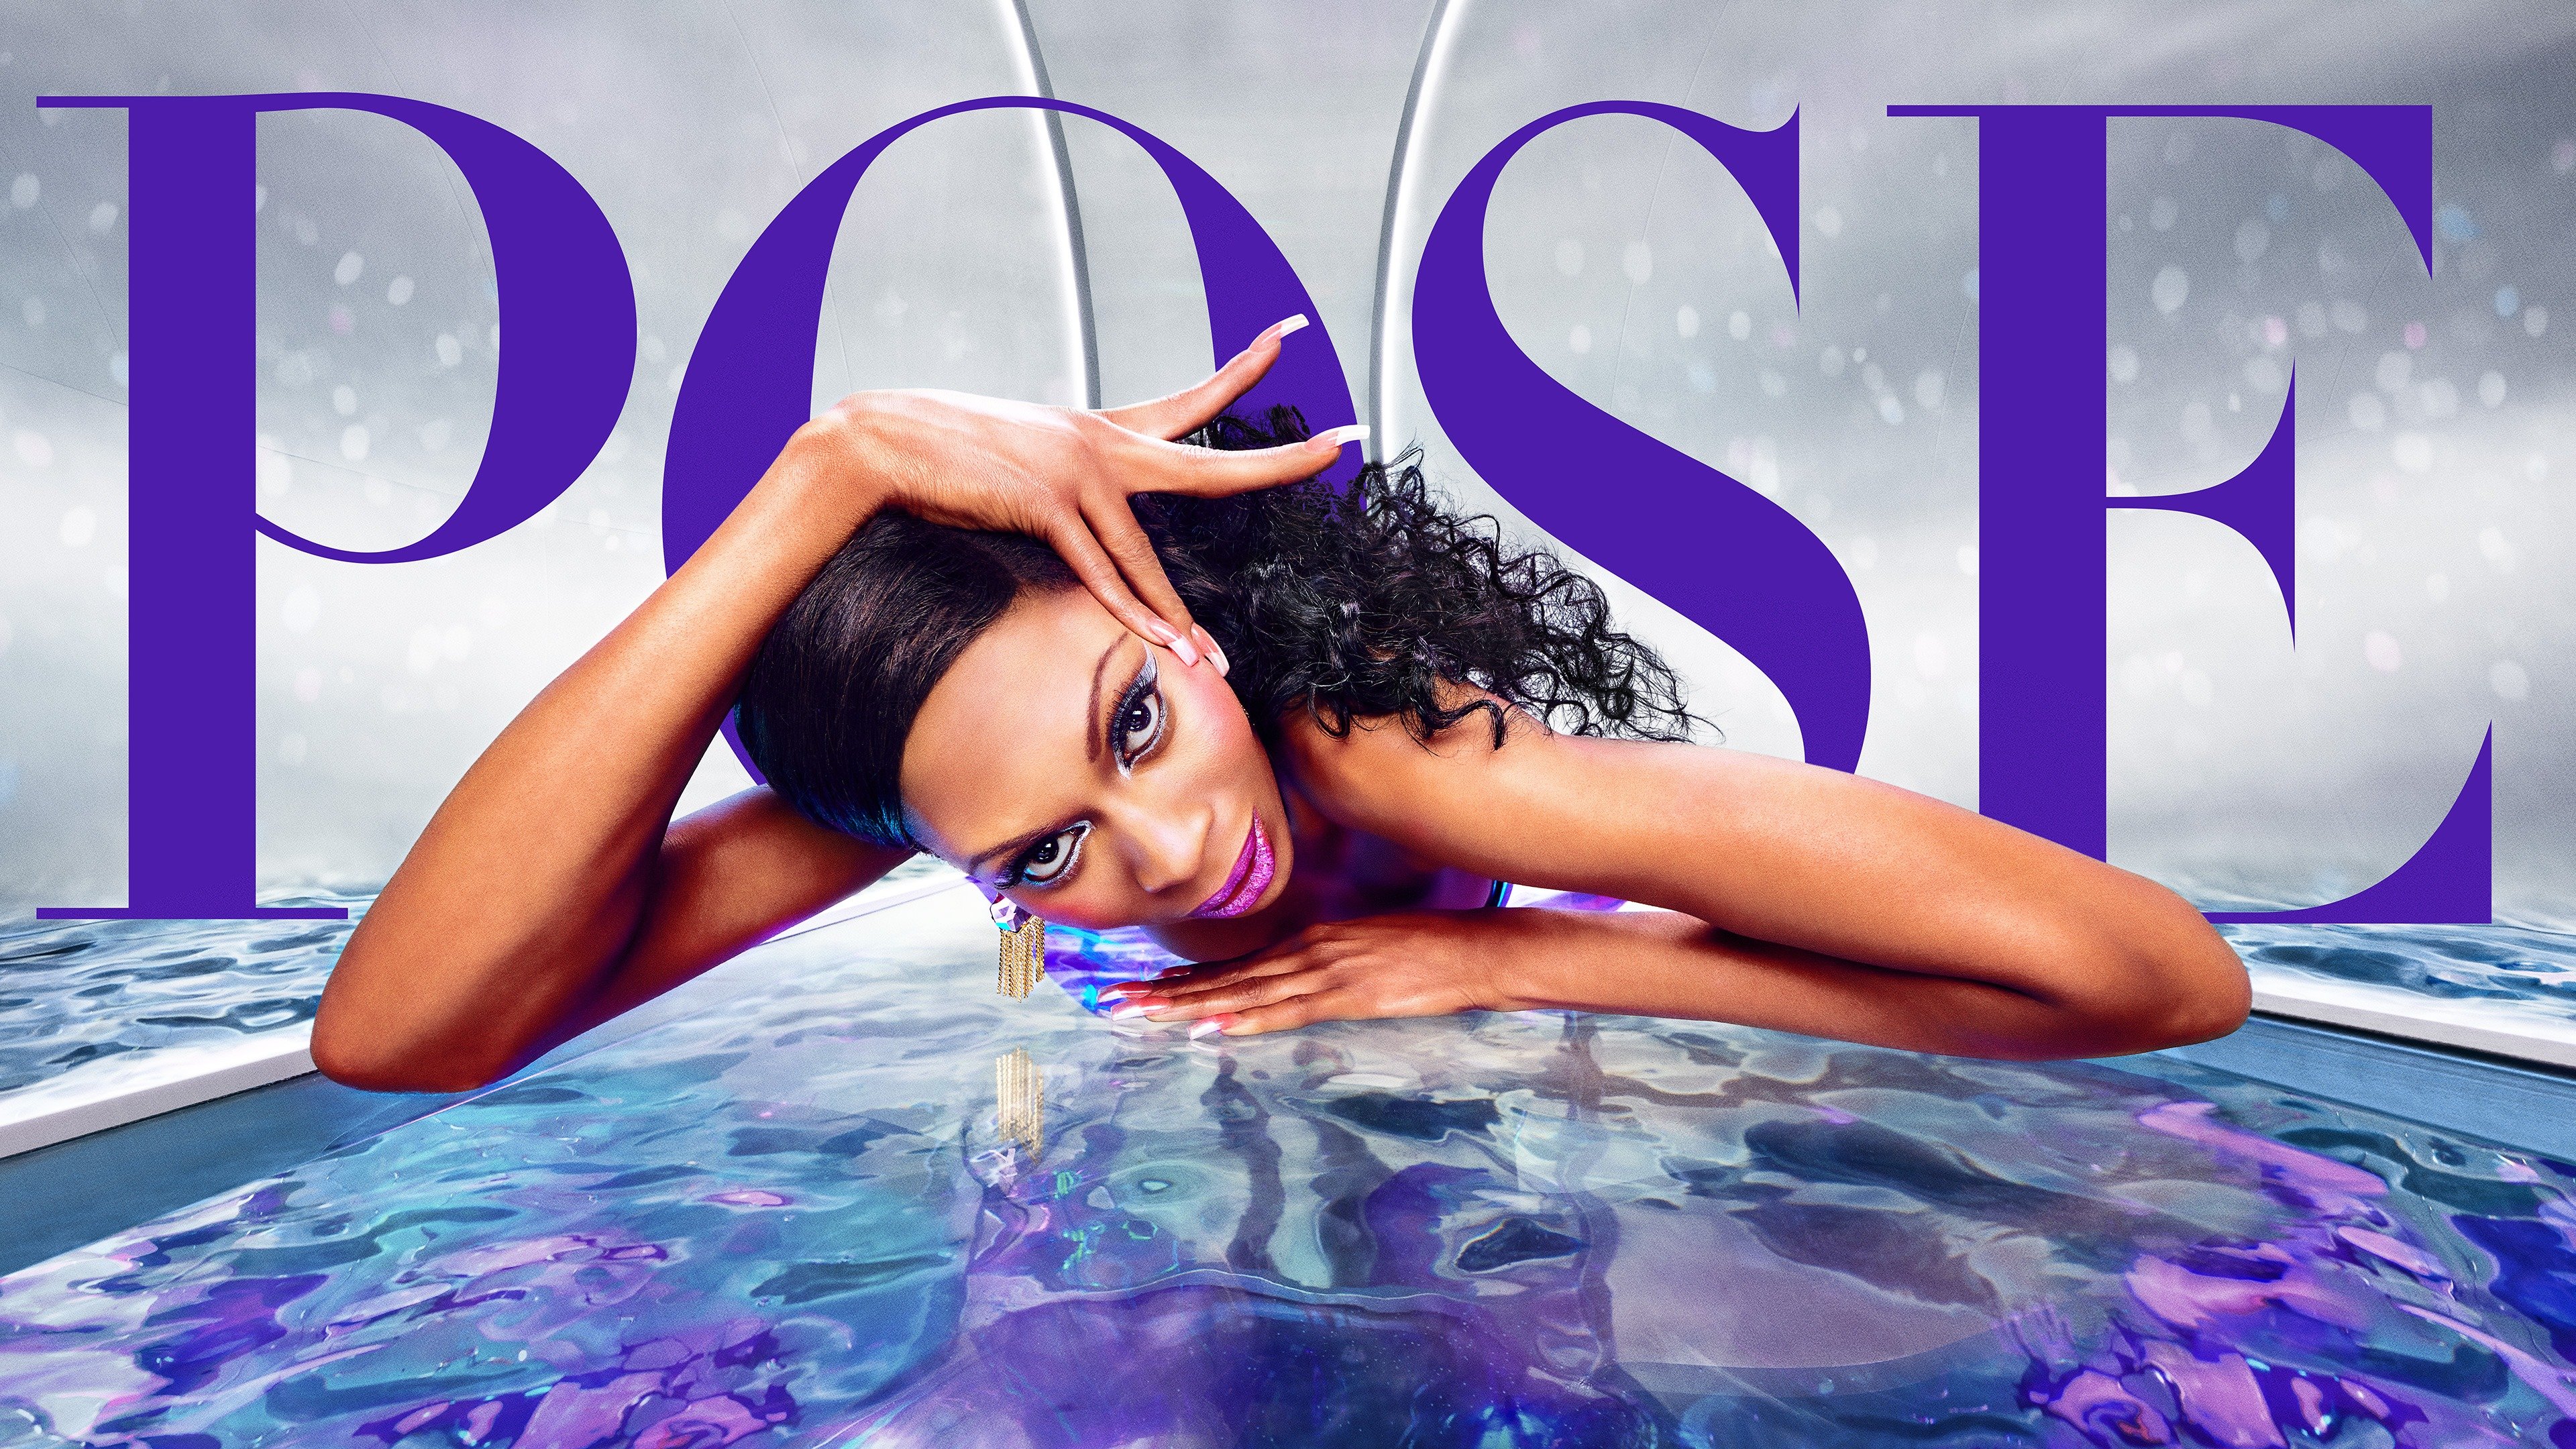 Everything You Need to Know Before 'Pose' Returns on Tuesday